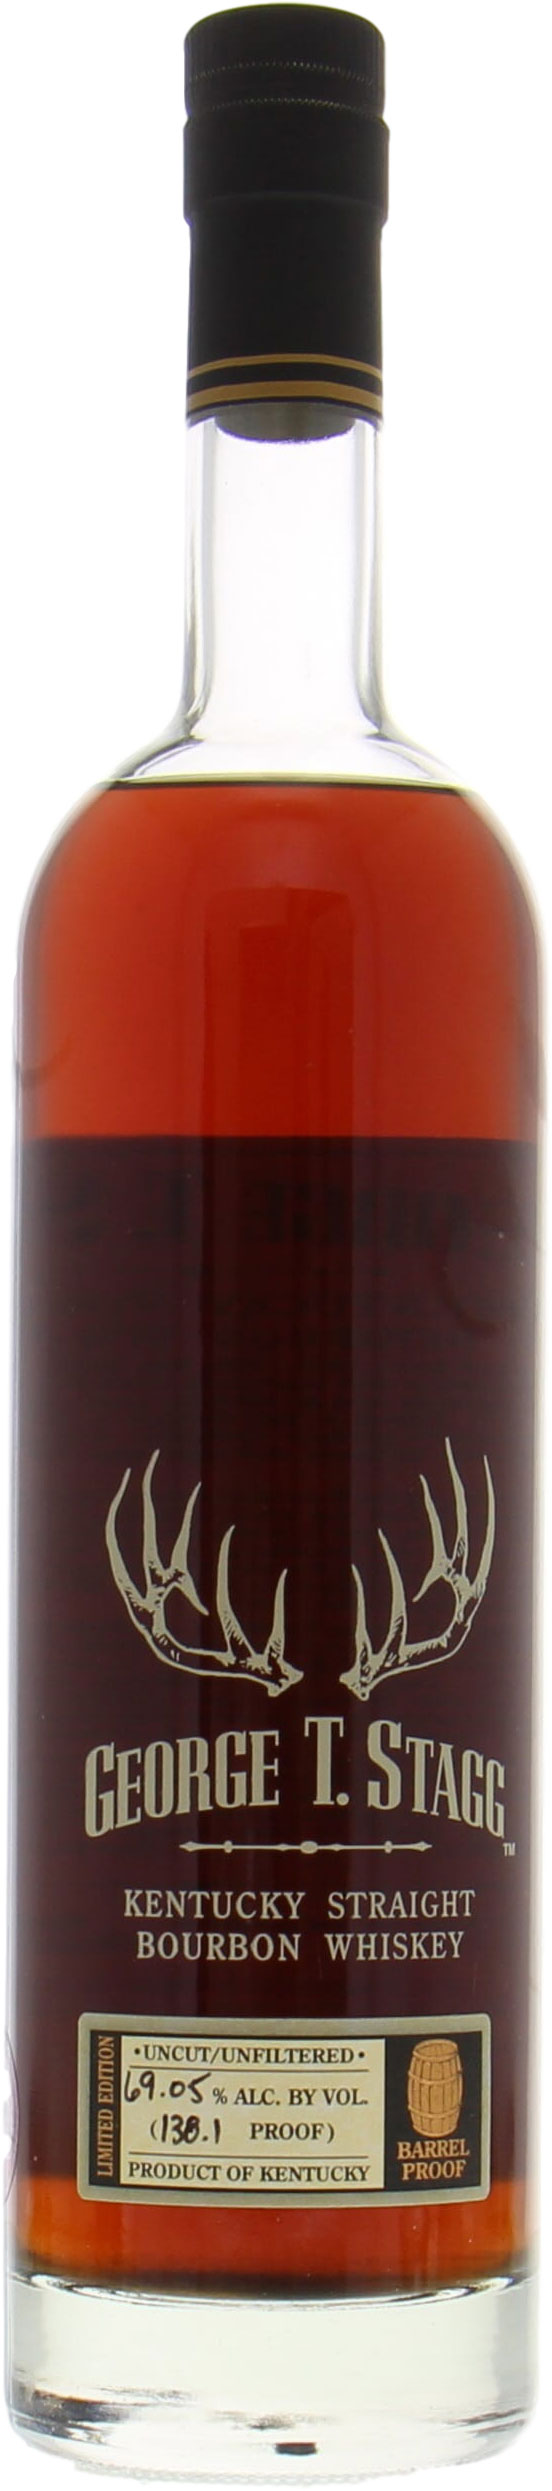 Buffalo Trace - George T. Stagg 16 Old 2014 Release 138.1 Proof 69.05% 1998